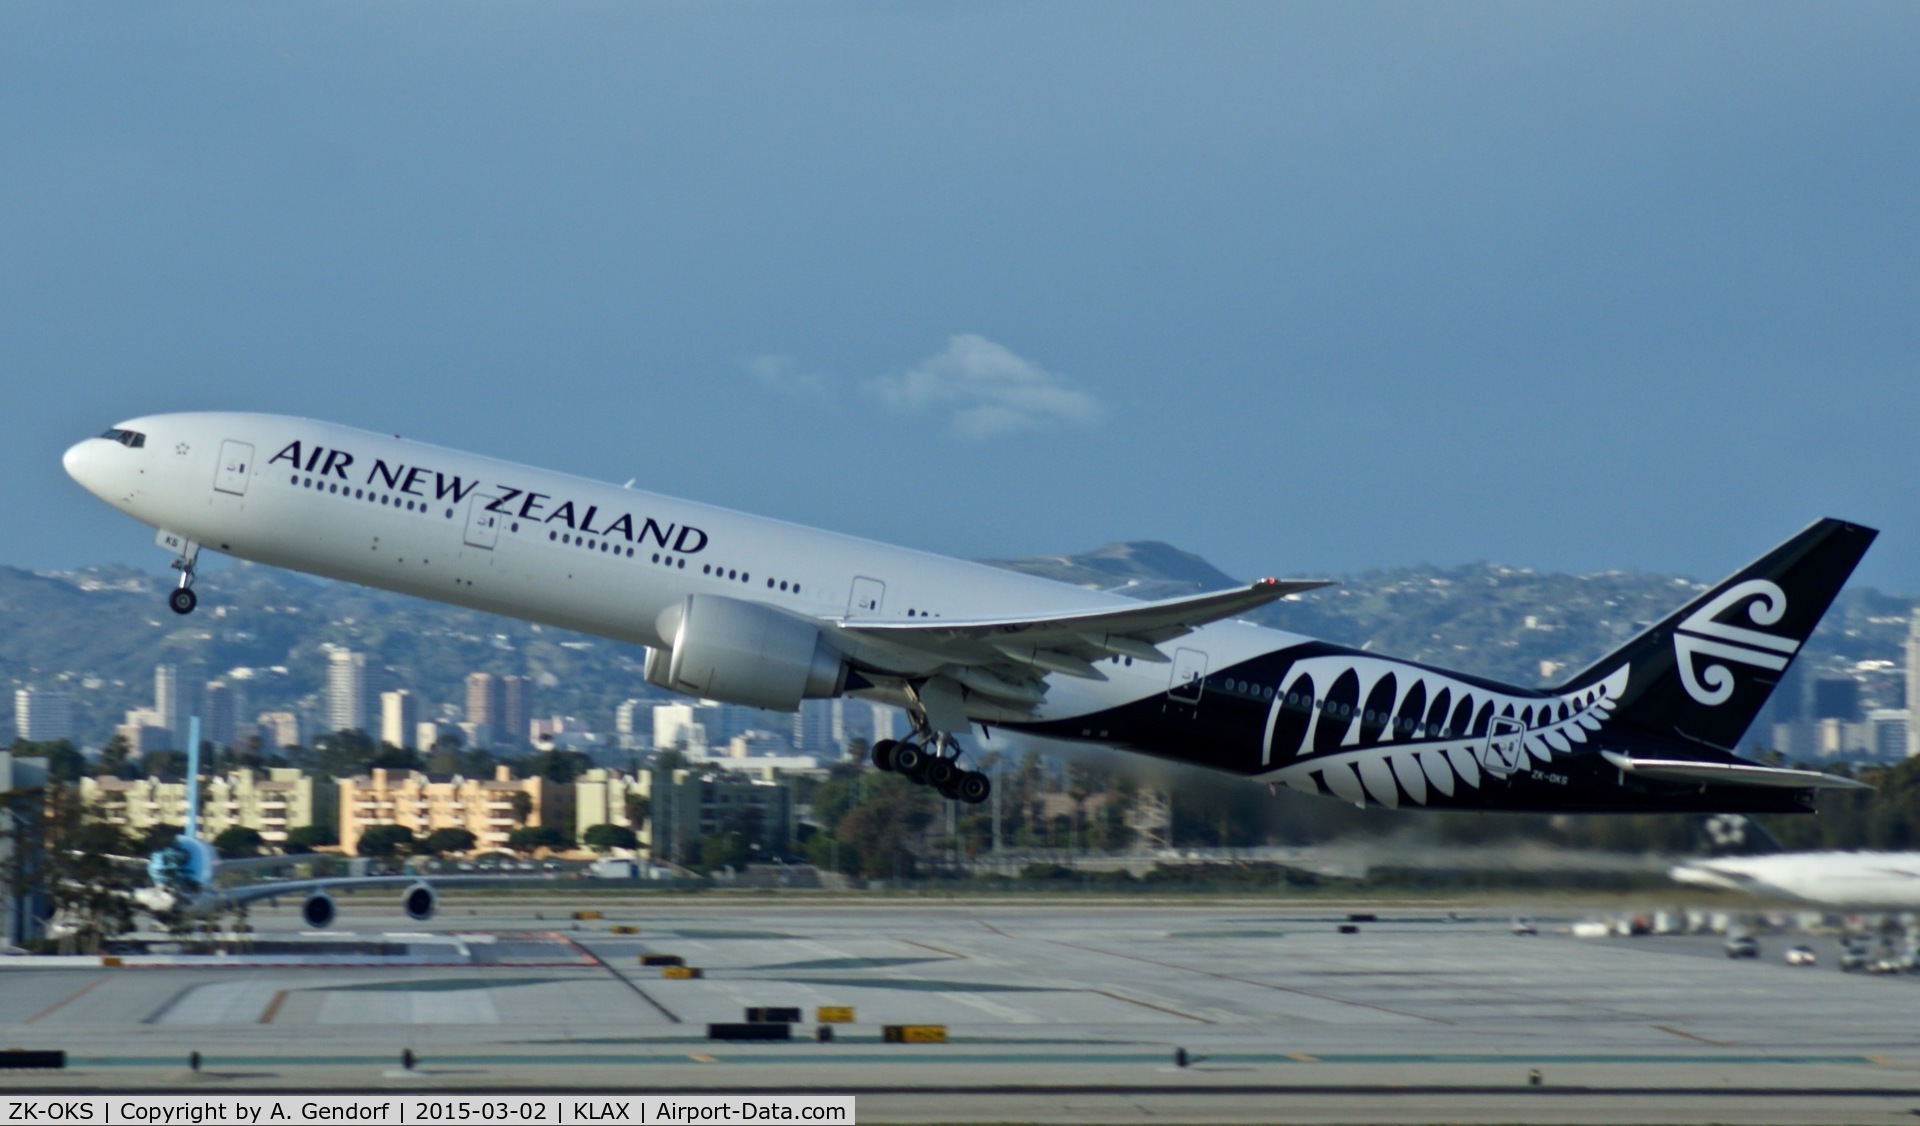 ZK-OKS, 2014 Boeing 777-306/ER C/N 44547, Air New Zealand, is here departing at Los Angeles Int'l(KLAX)